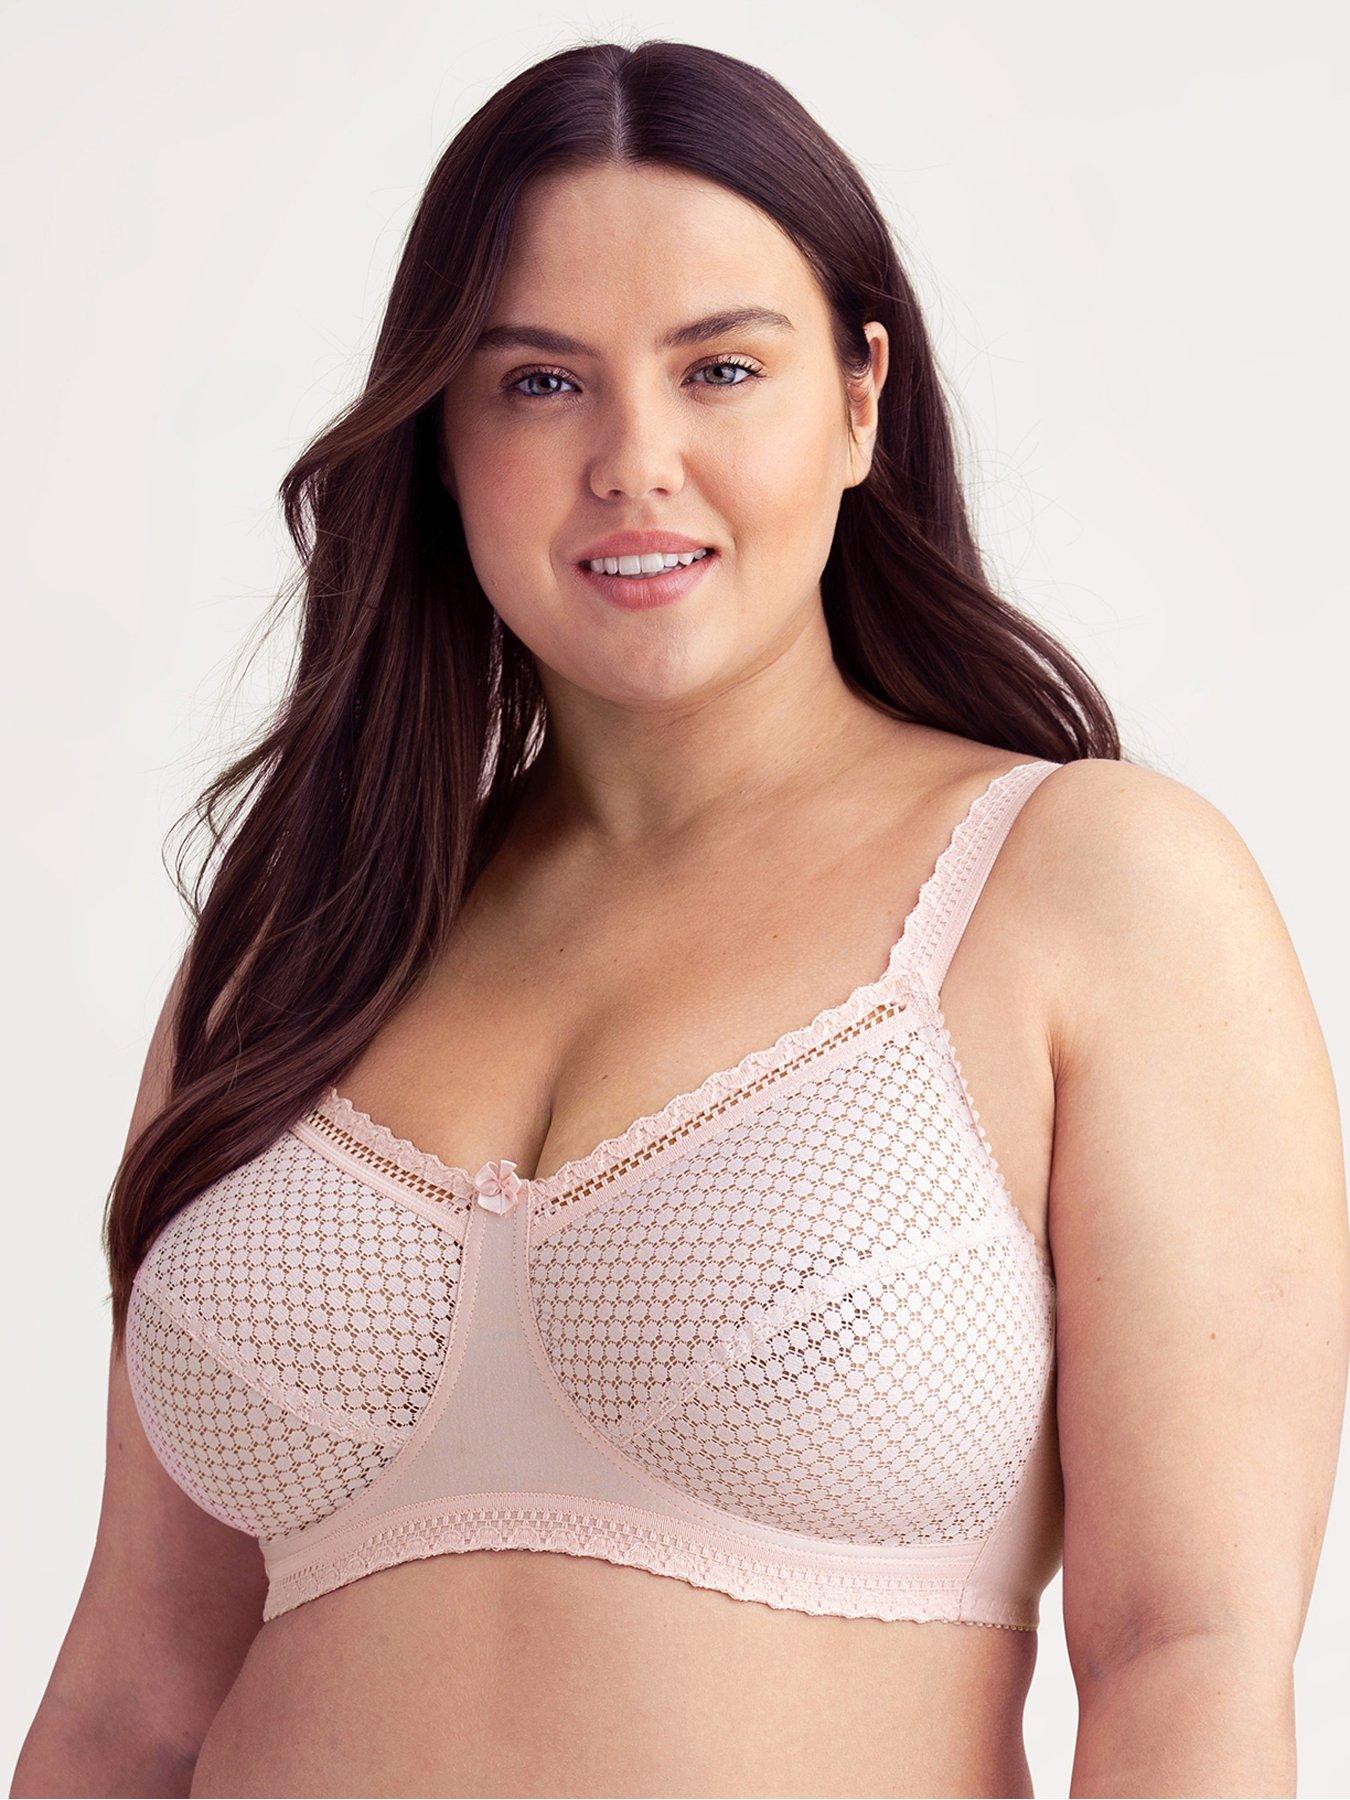  Miss Mary of Sweden Cotton Comfort Women's Non-Wired Bra White  36E : Clothing, Shoes & Jewelry